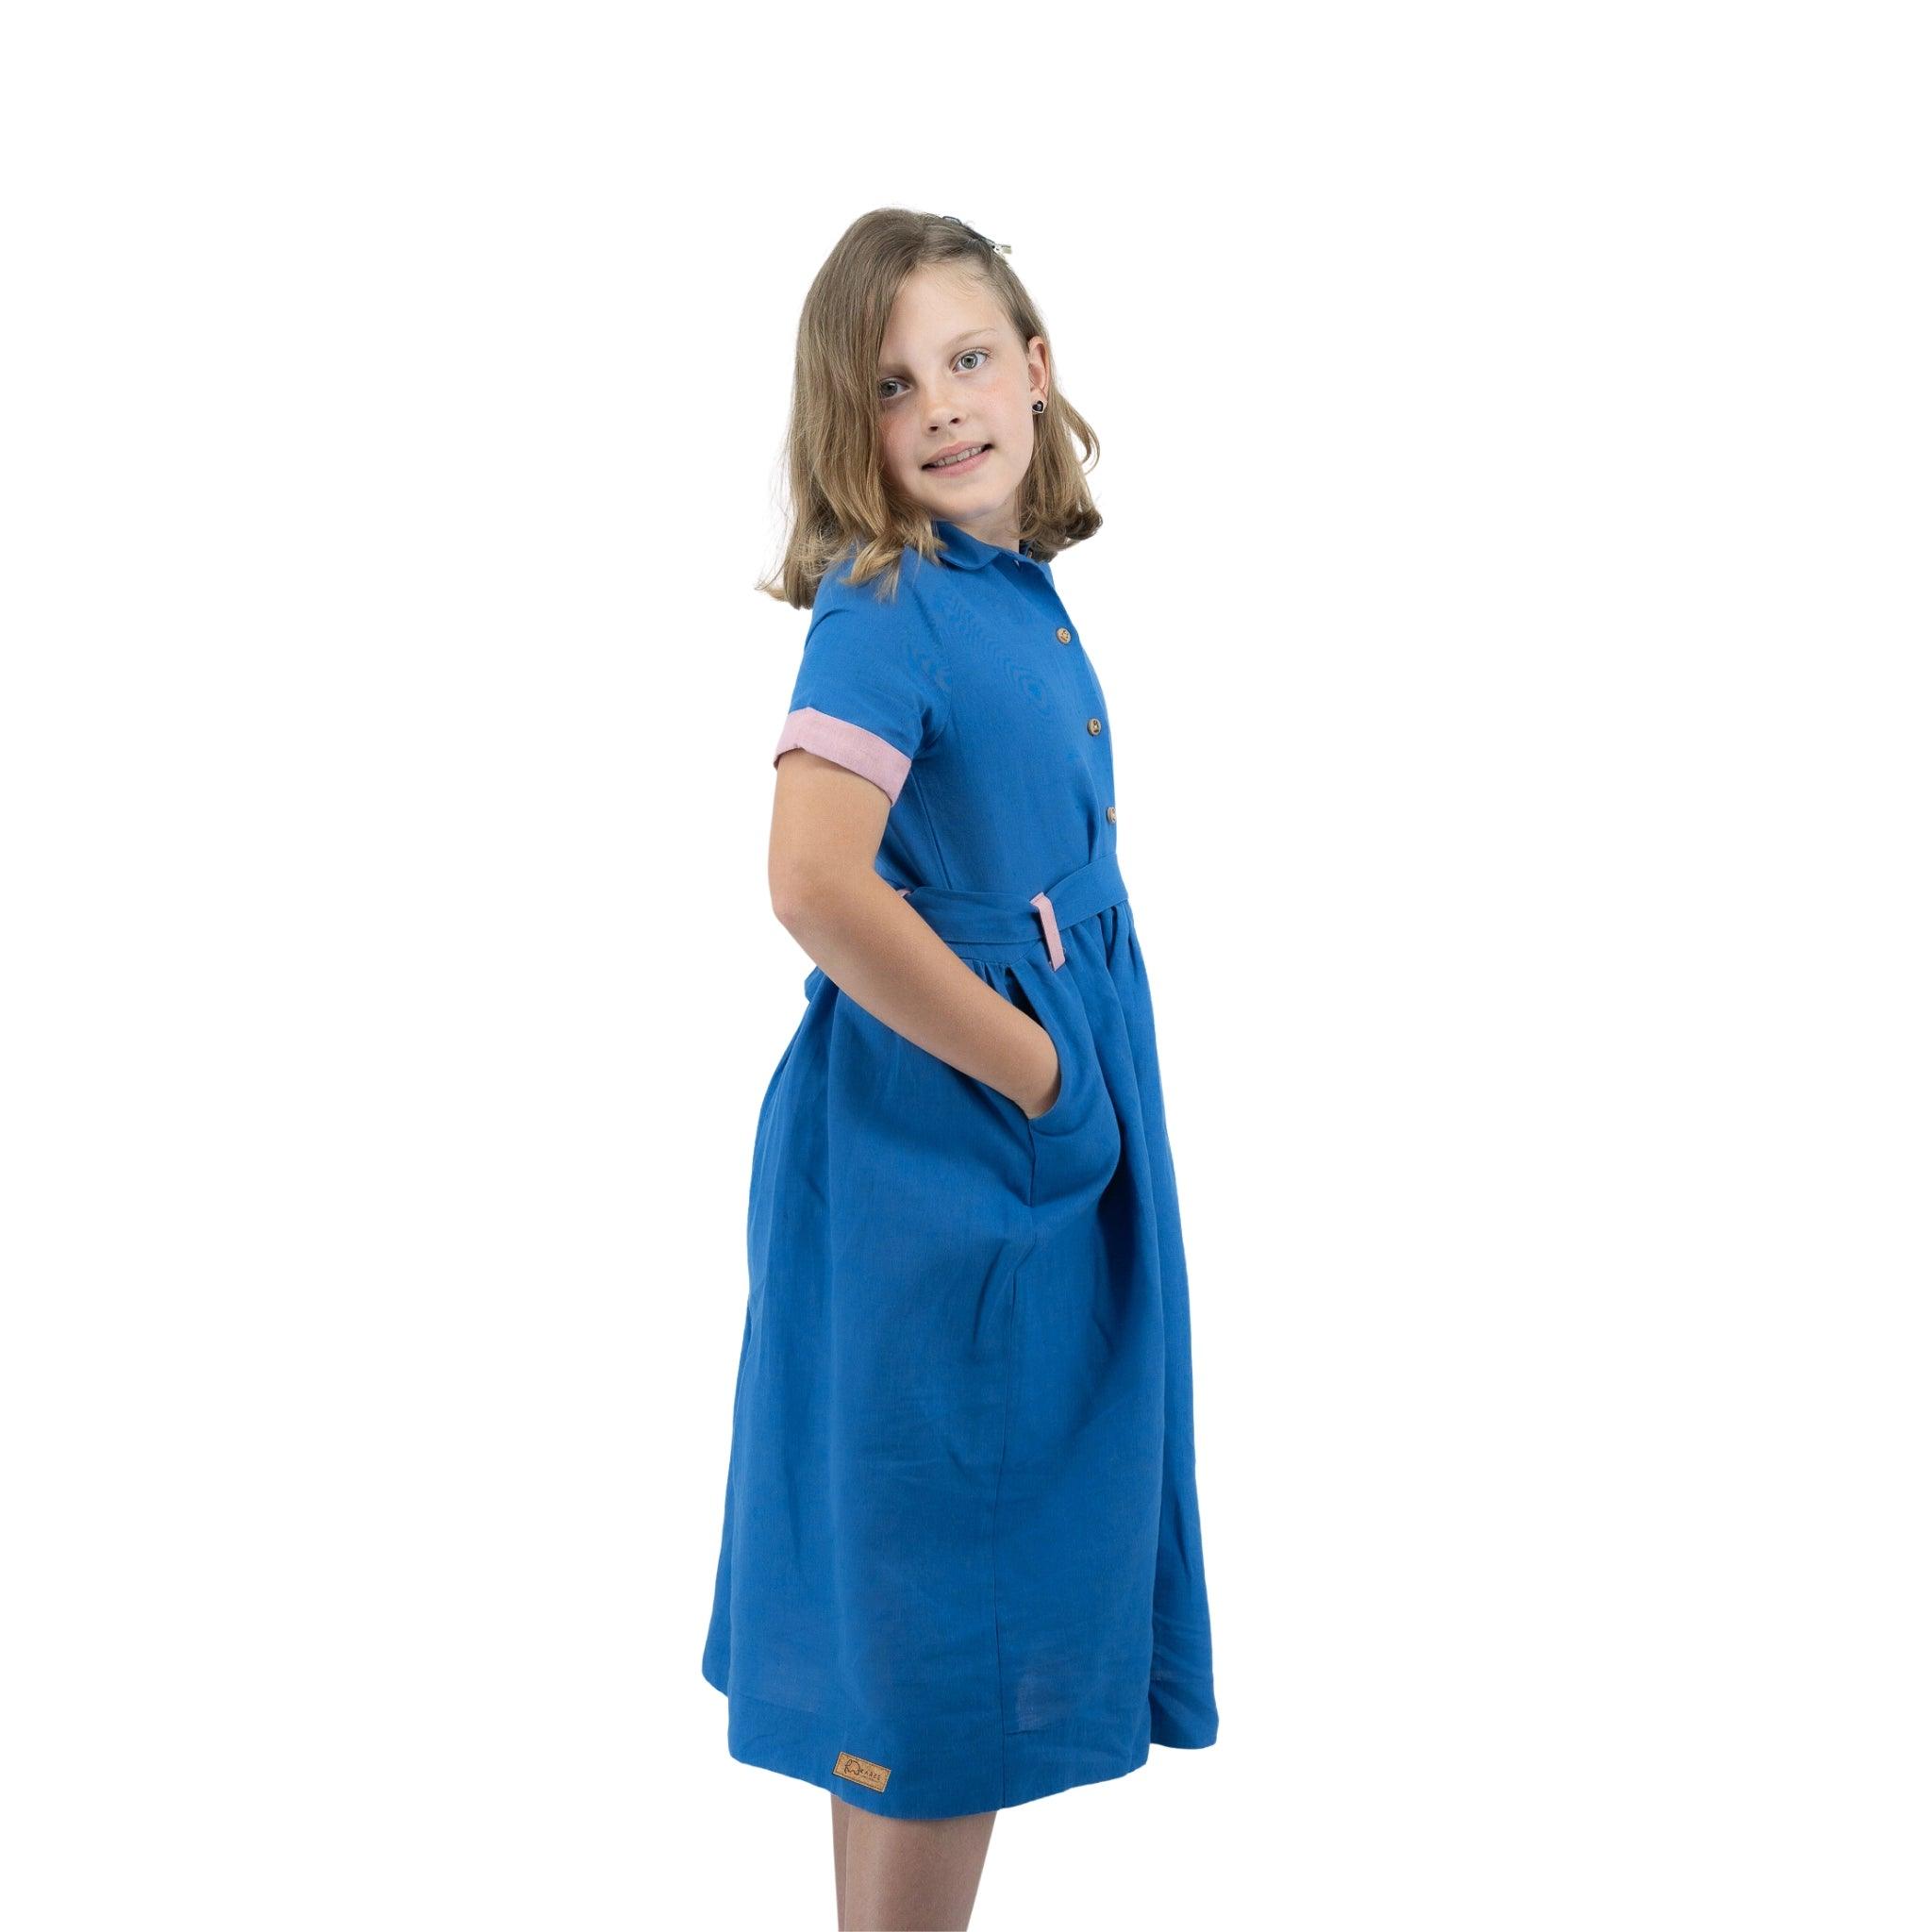 Young girl posing in a Karee Parisian Blue Linen Dress for Girls with hands on her hips, smiling at the camera, isolated on a white background.